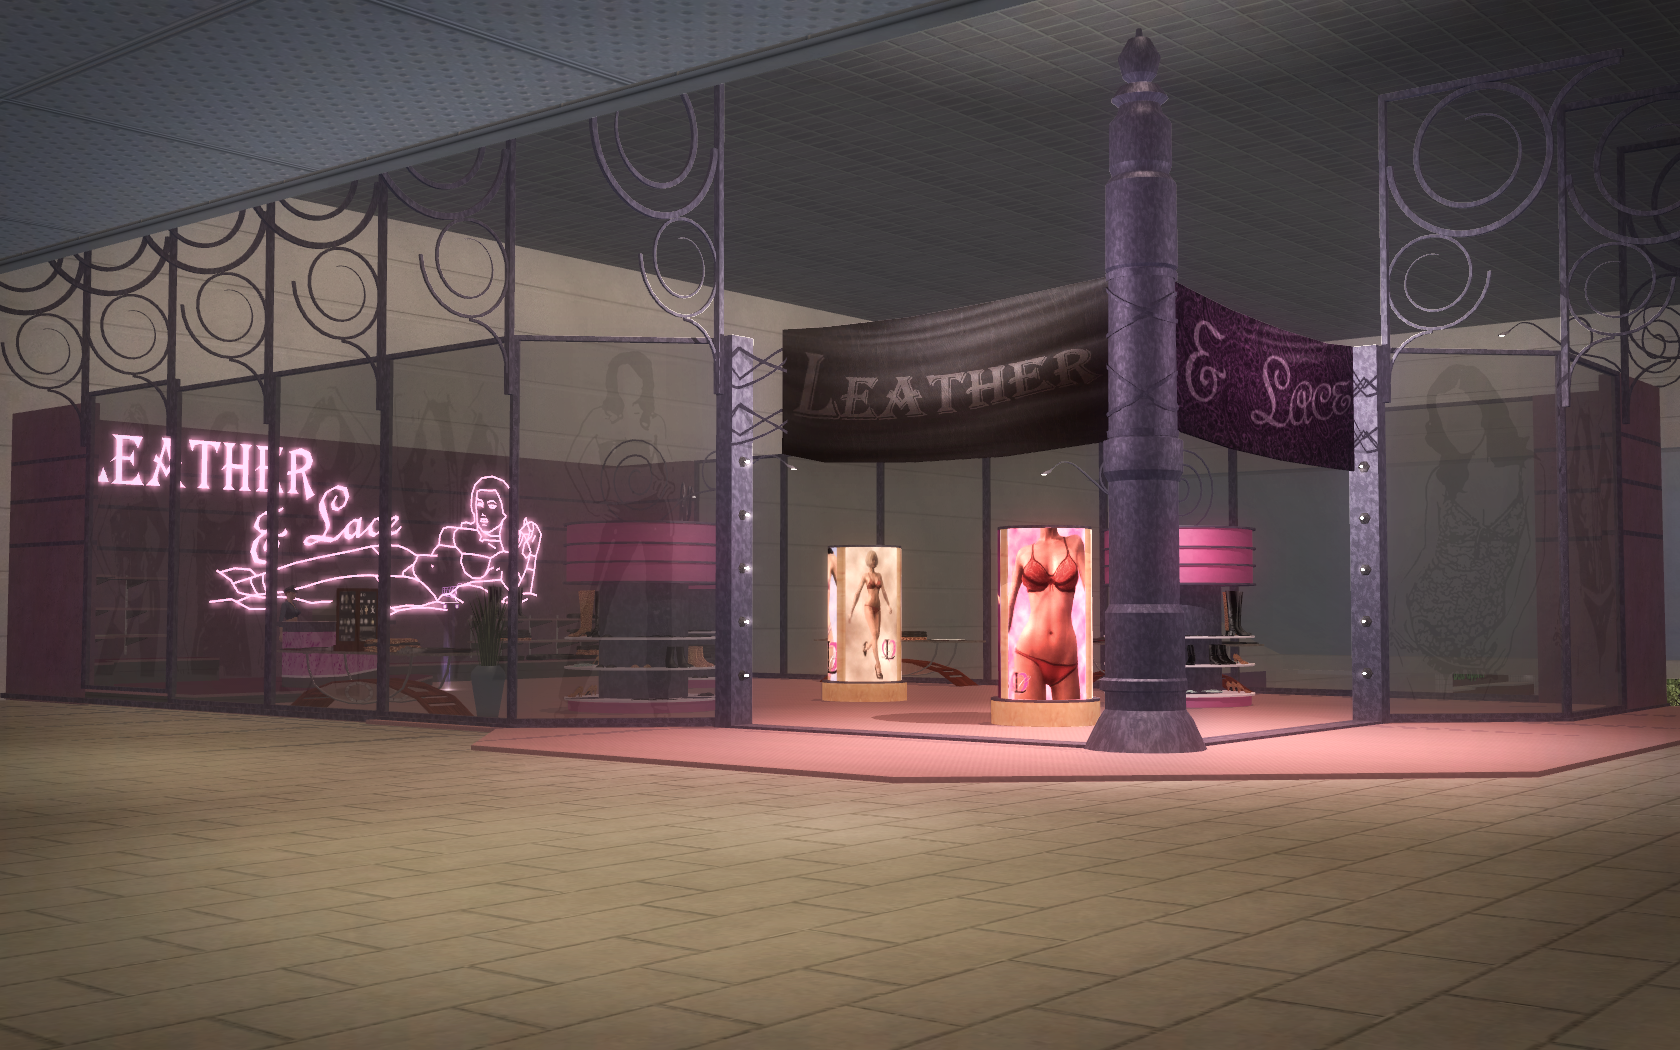 saints row 2 map leather and lace locations